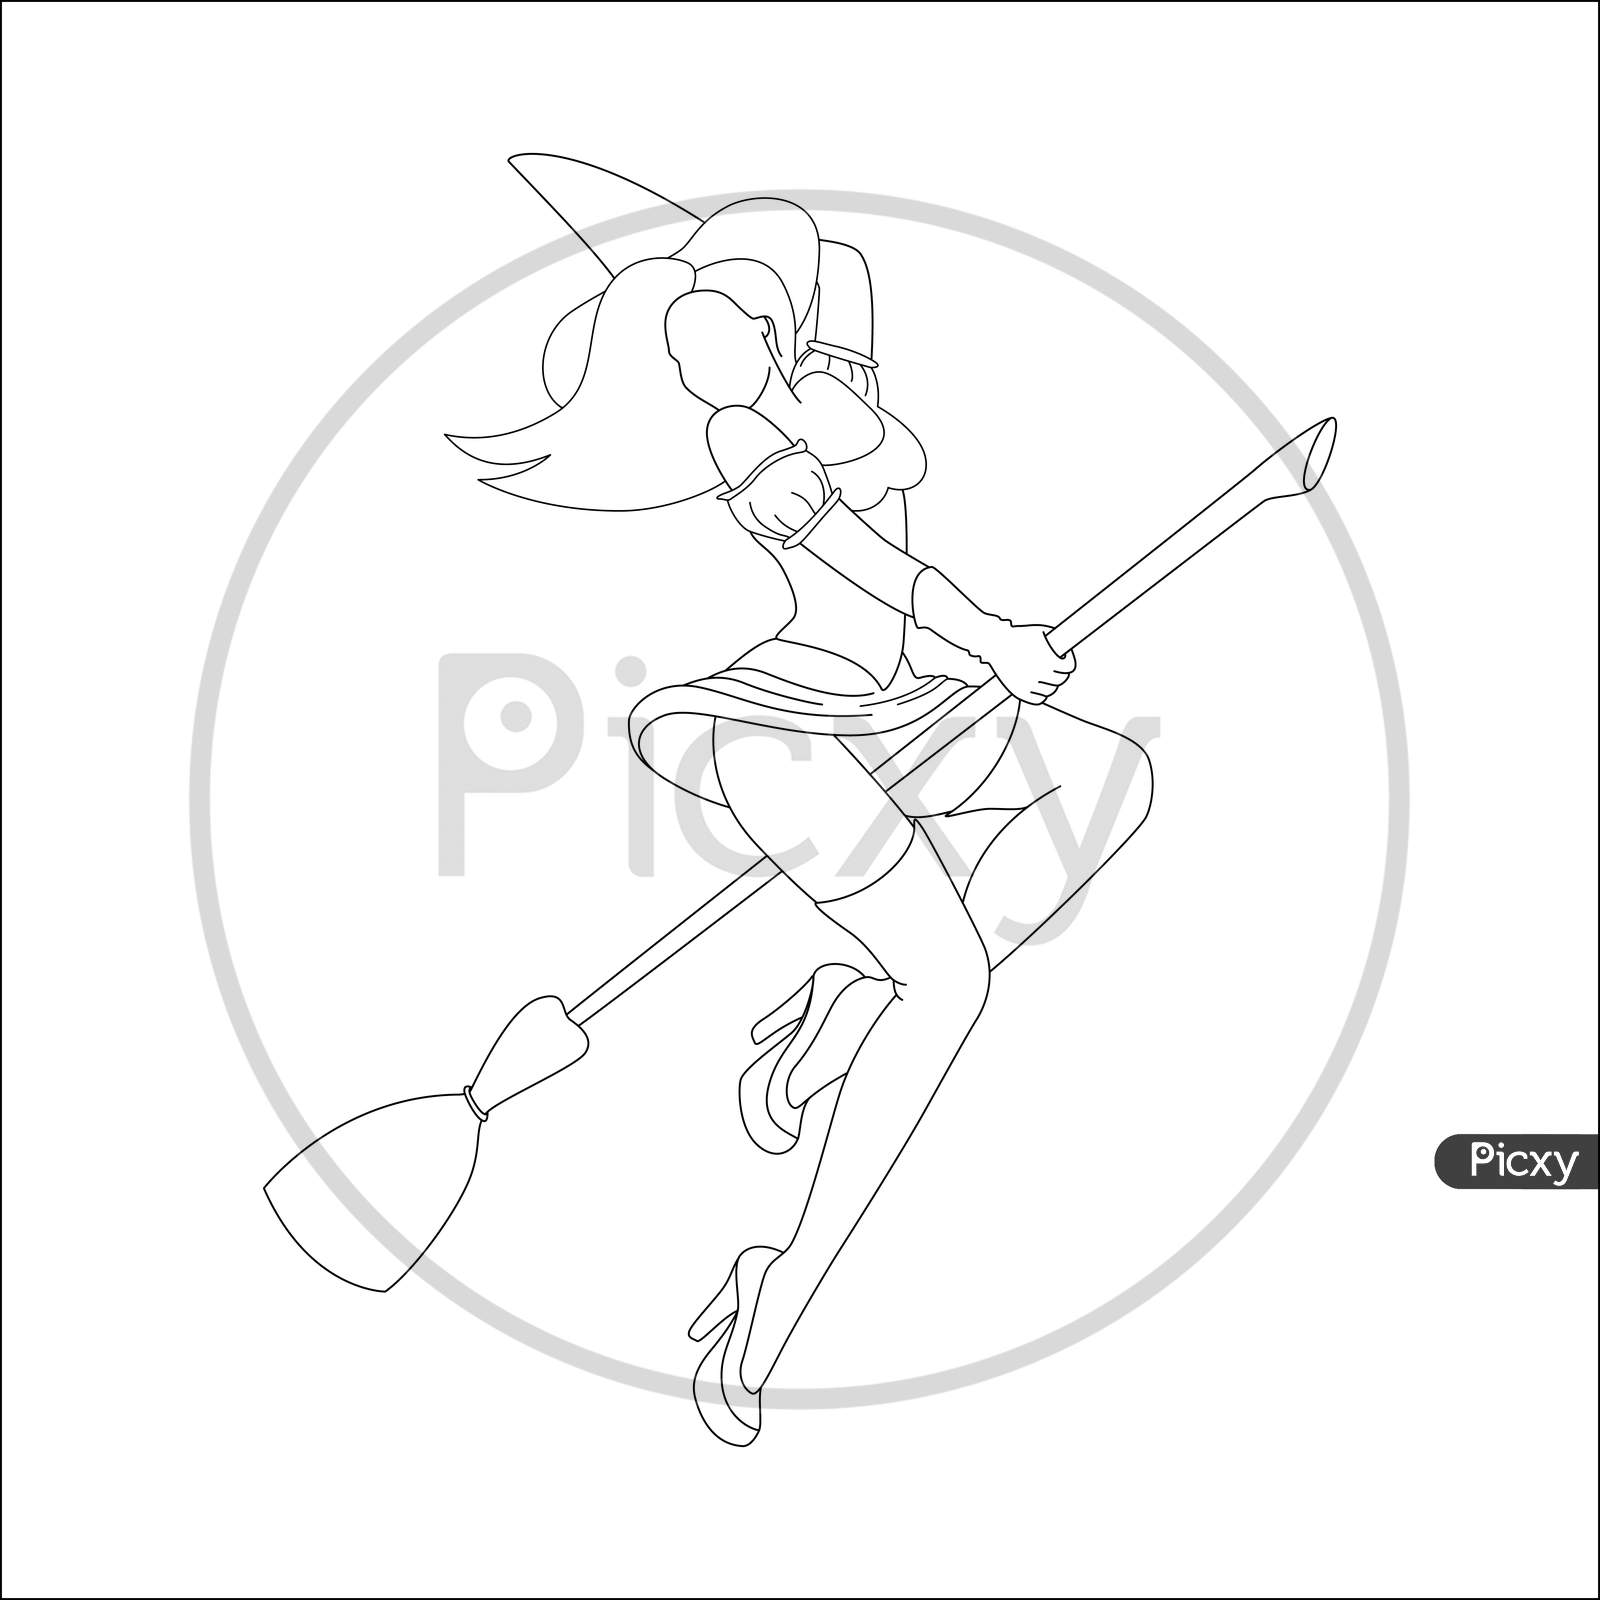 Anime Coloring Page Cliparts, Stock Vector and Royalty Free Anime Coloring  Page Illustrations